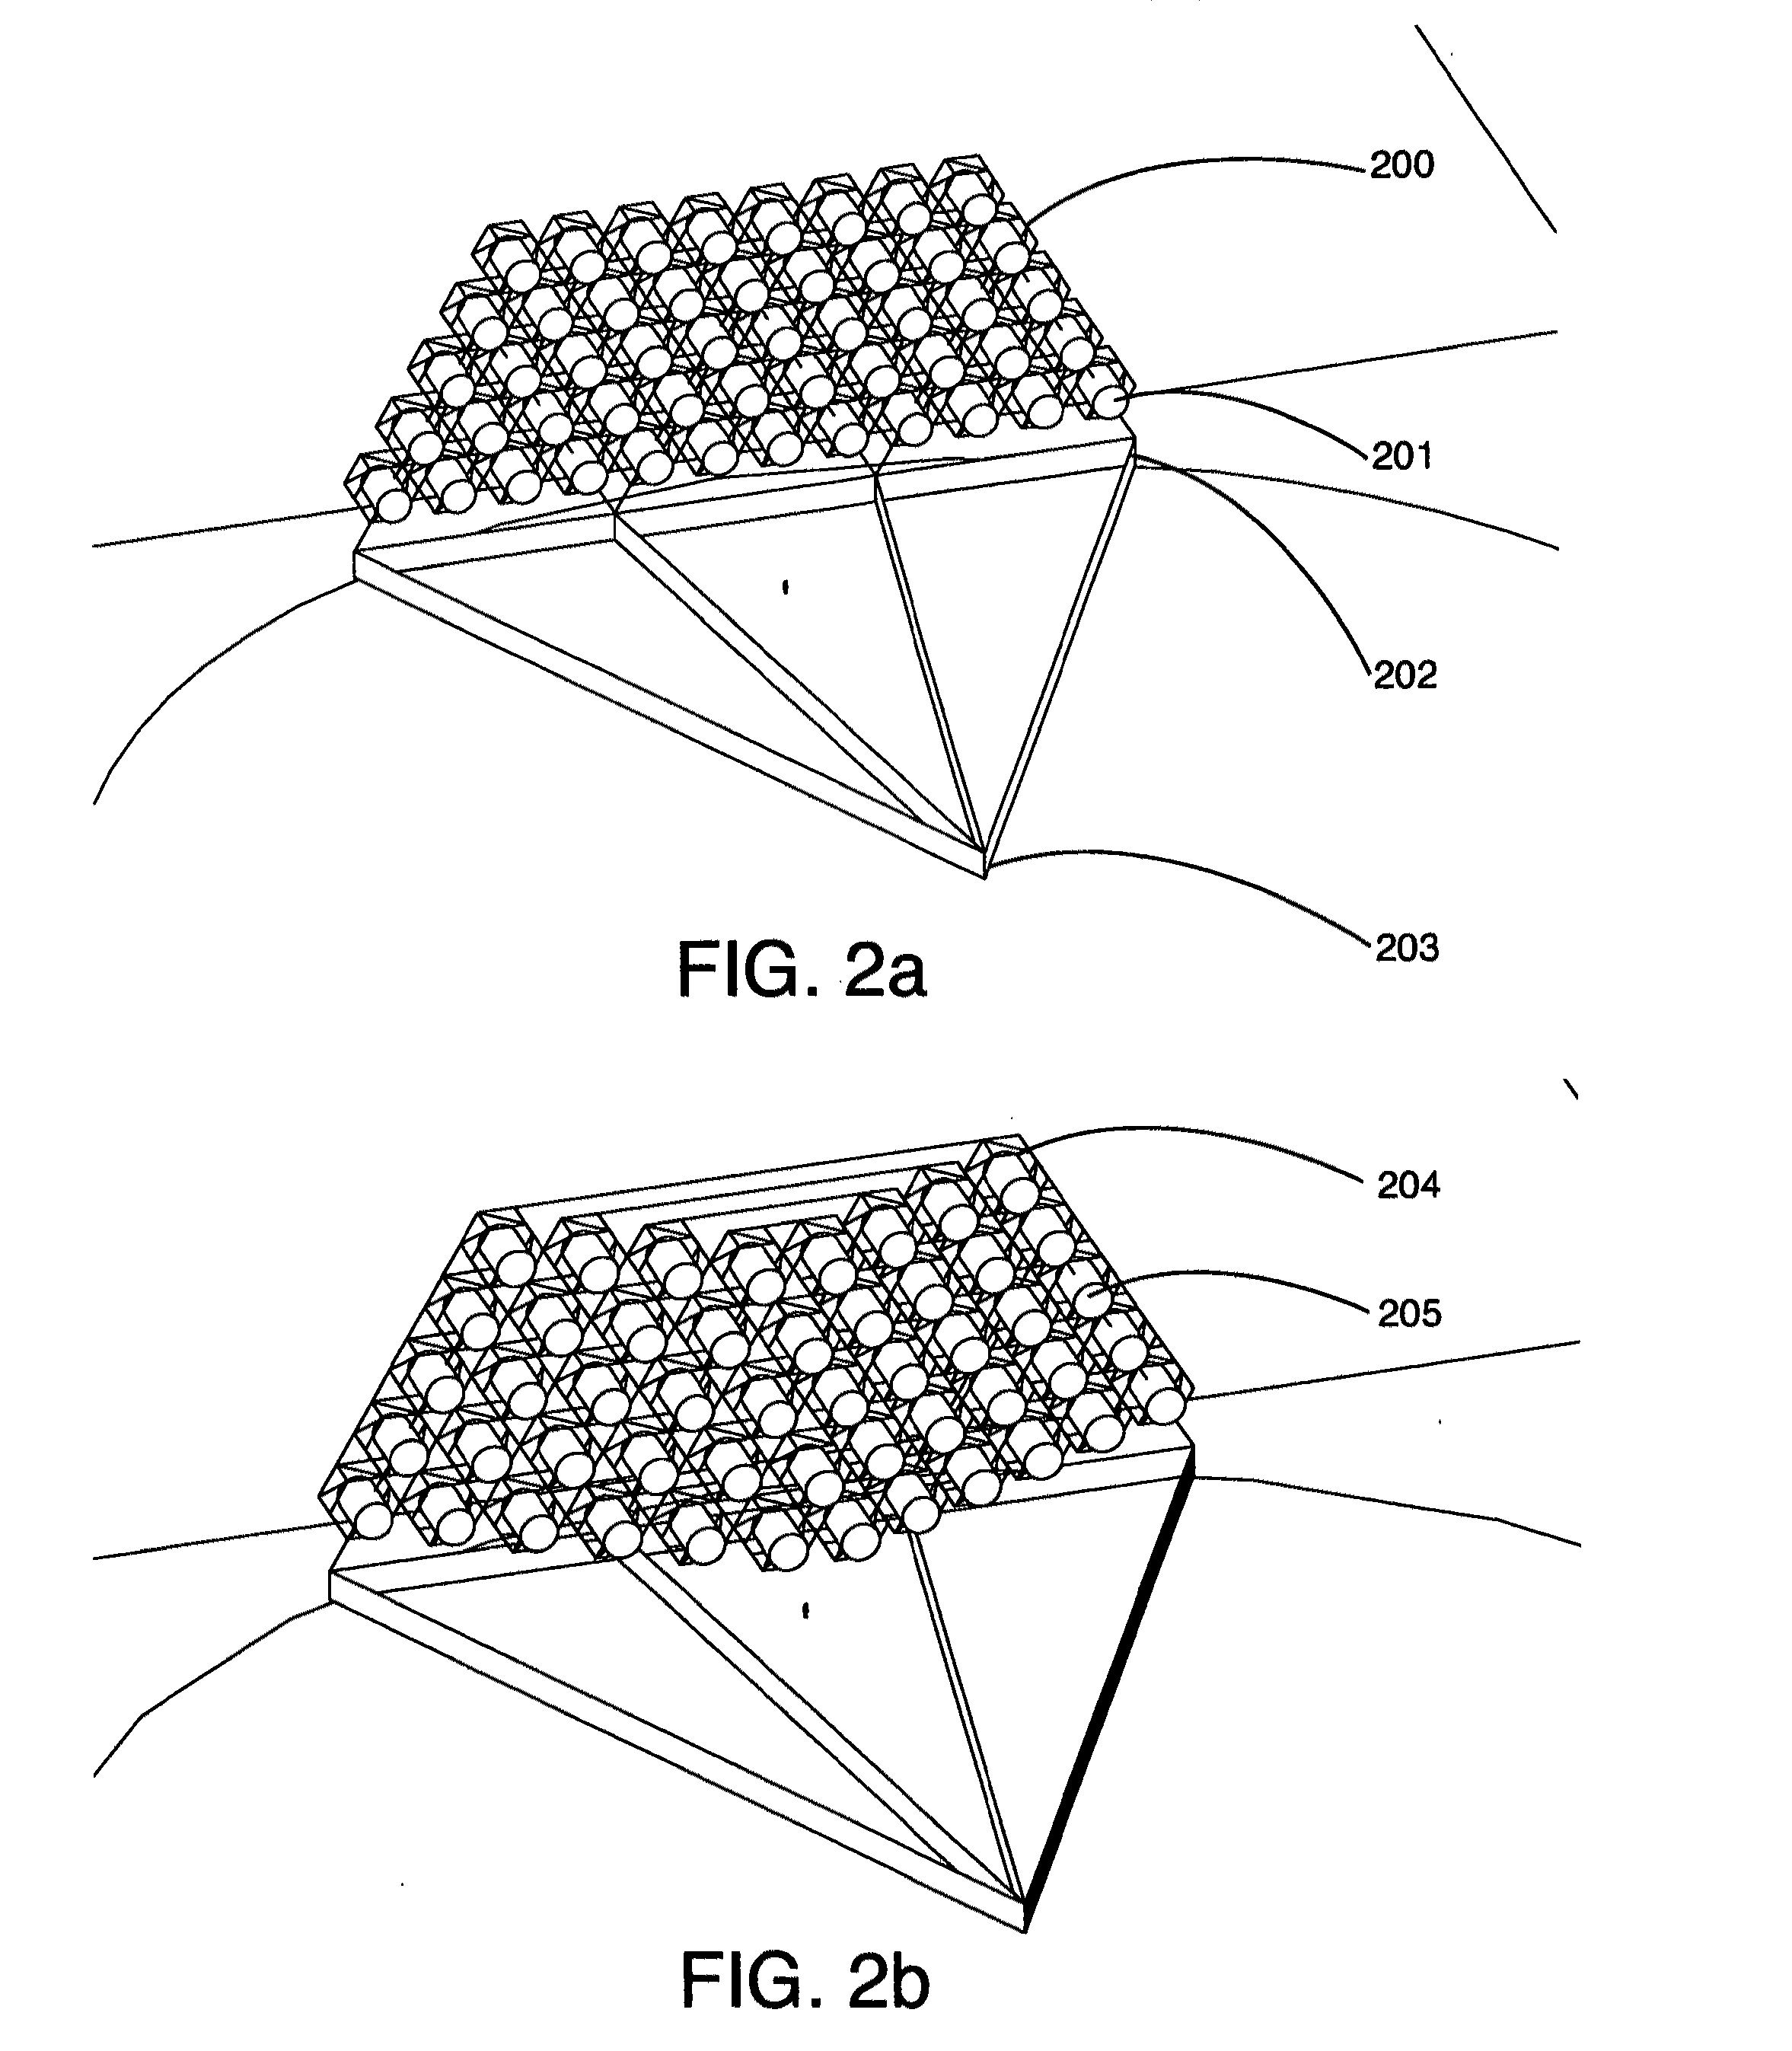 Pivoting structural cellular wall for wind energy generation